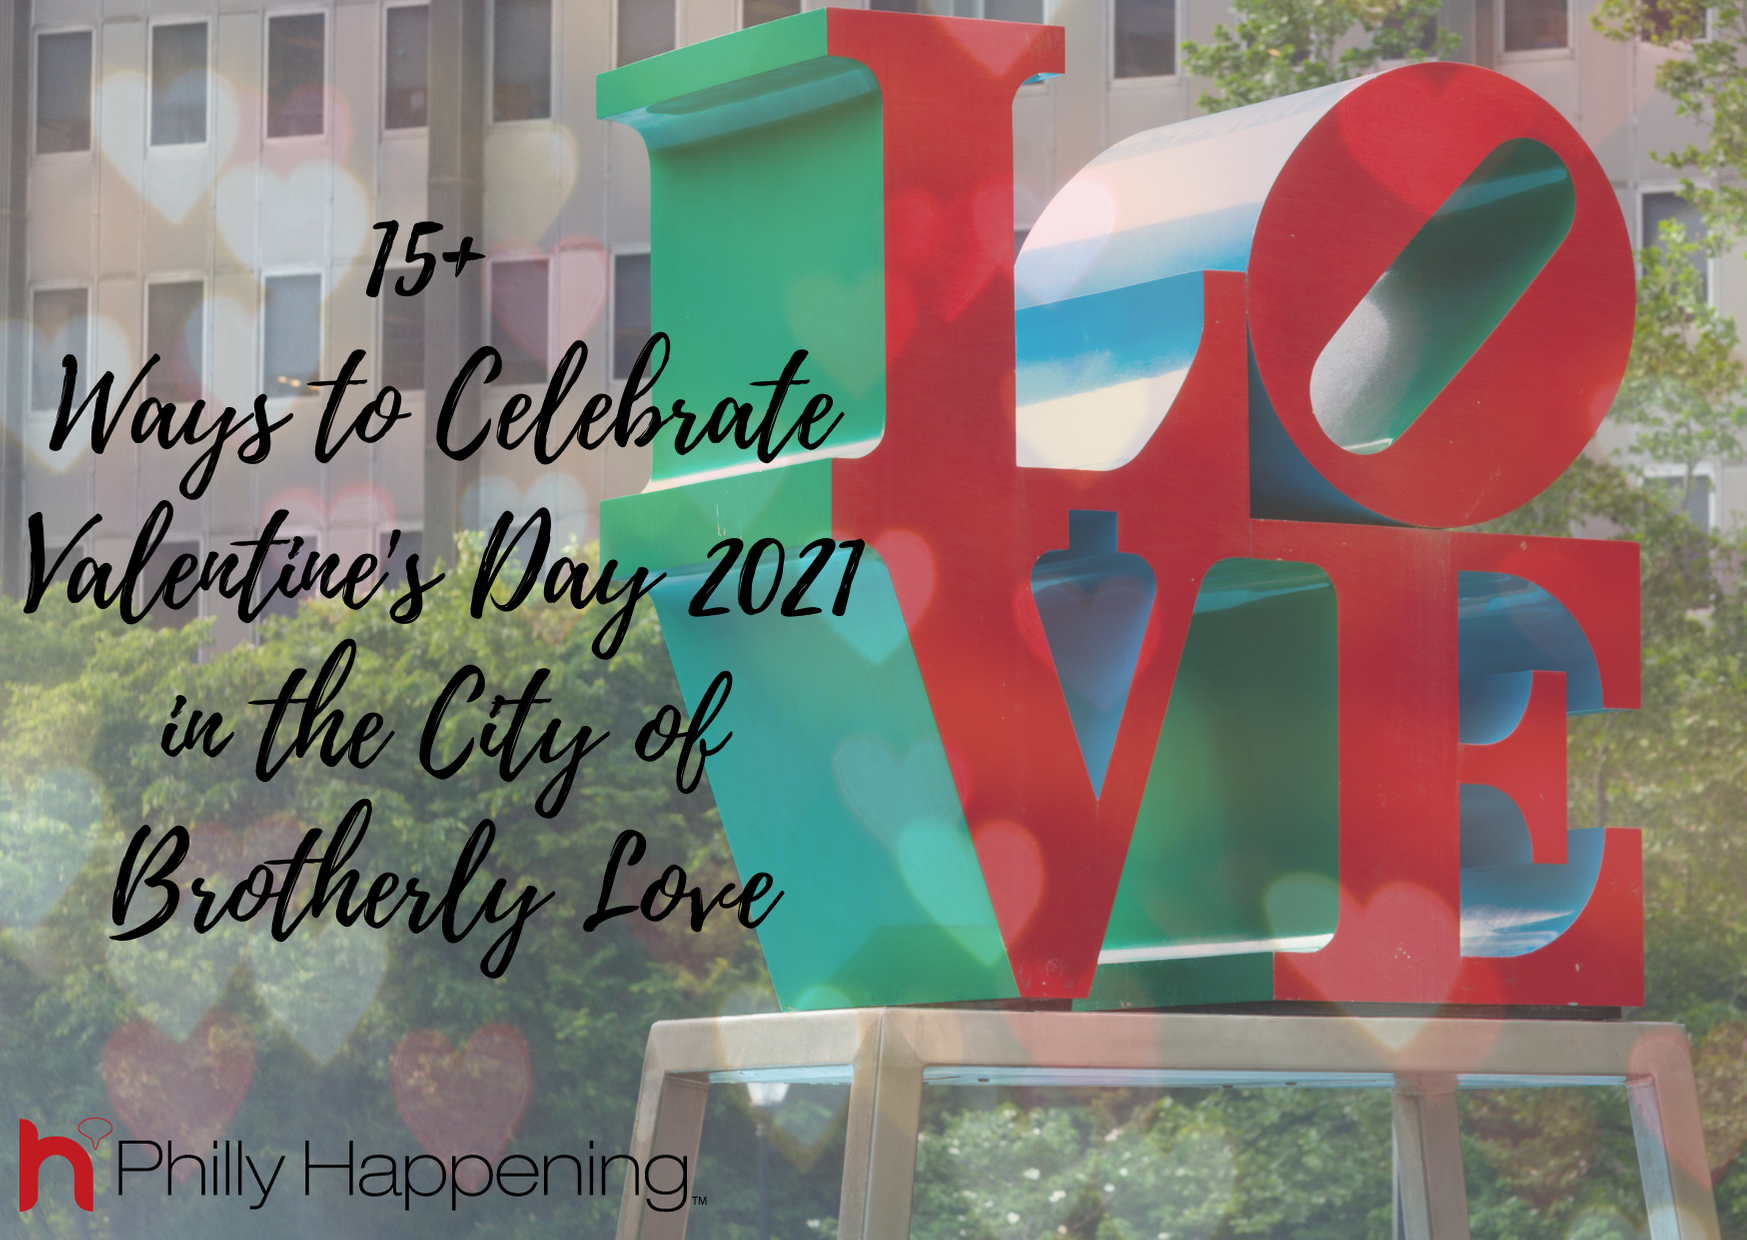 15+ Ways to Celebrate Valentine’s Day 2021 in the City of Brotherly Love